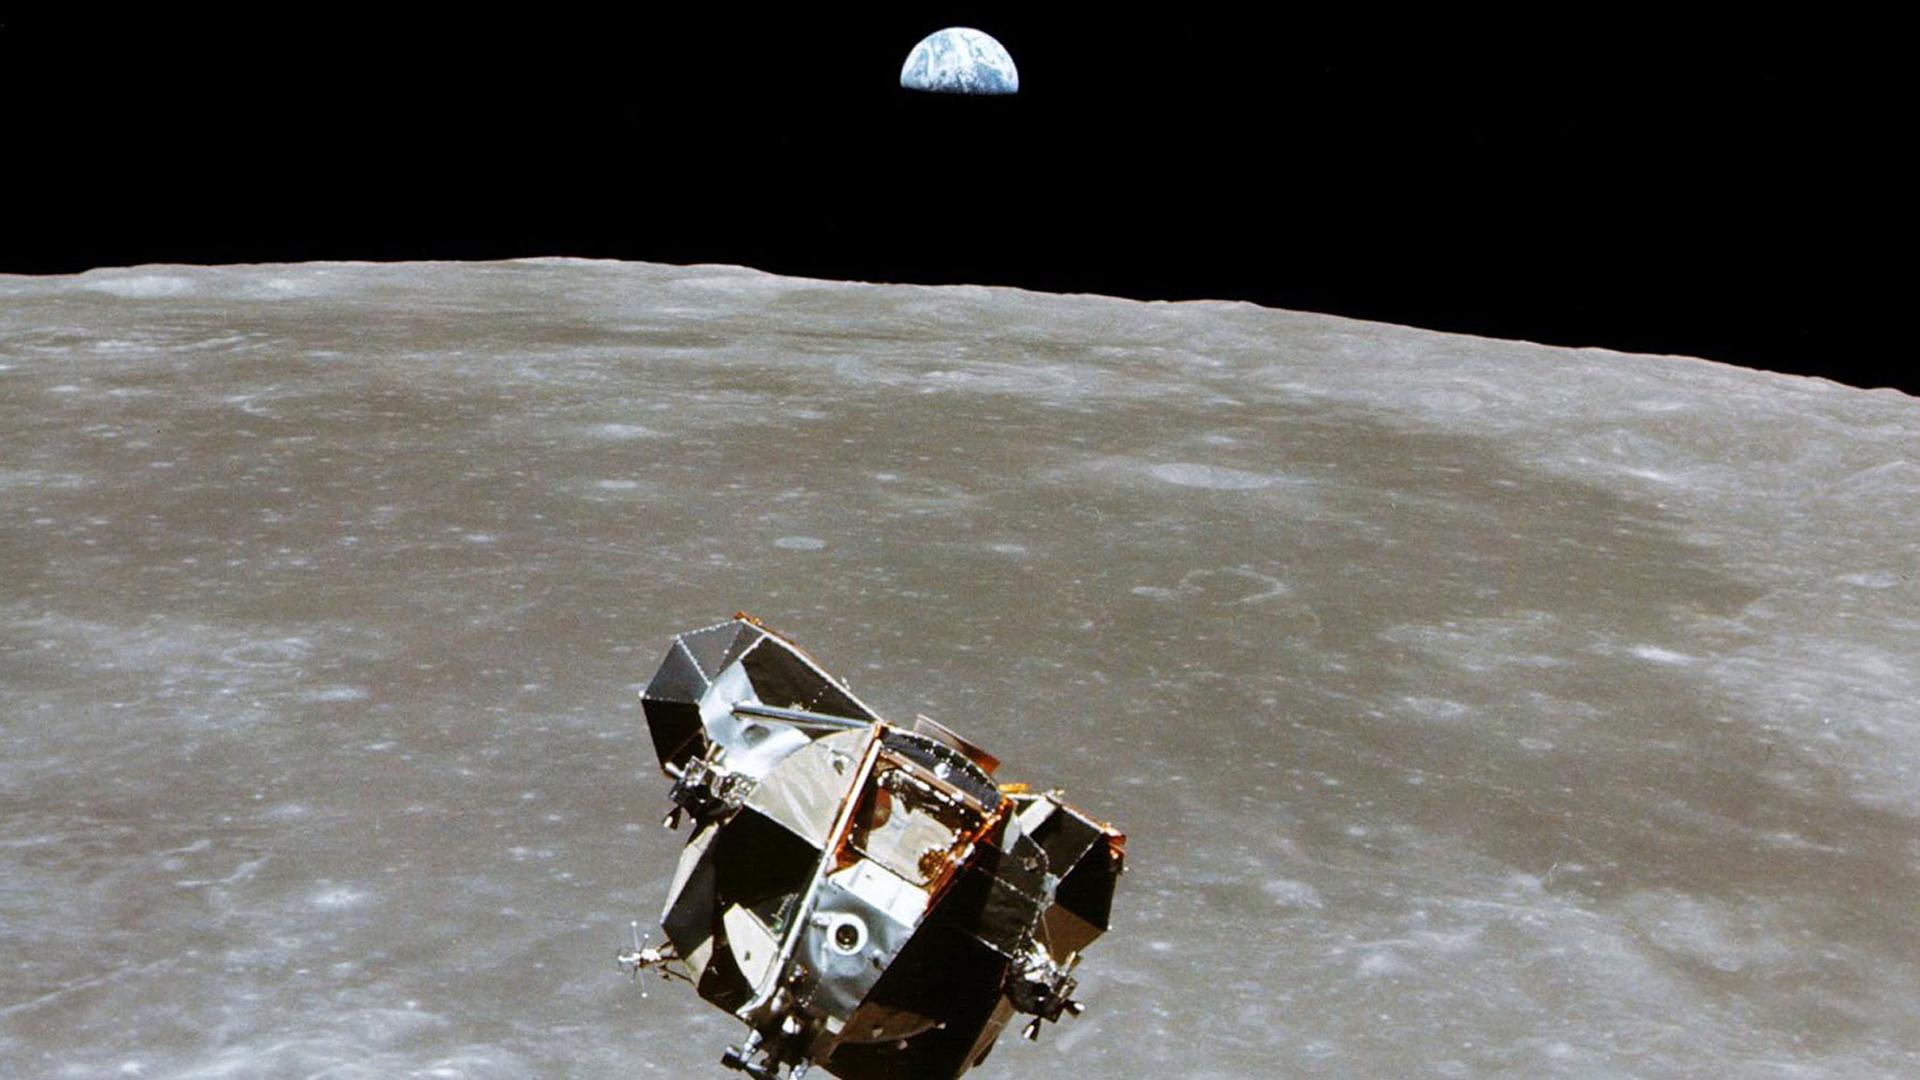 The Apollo 11 Lunar Module is shown in the nearground with the moon's surface below it and Earth shown in the distance.